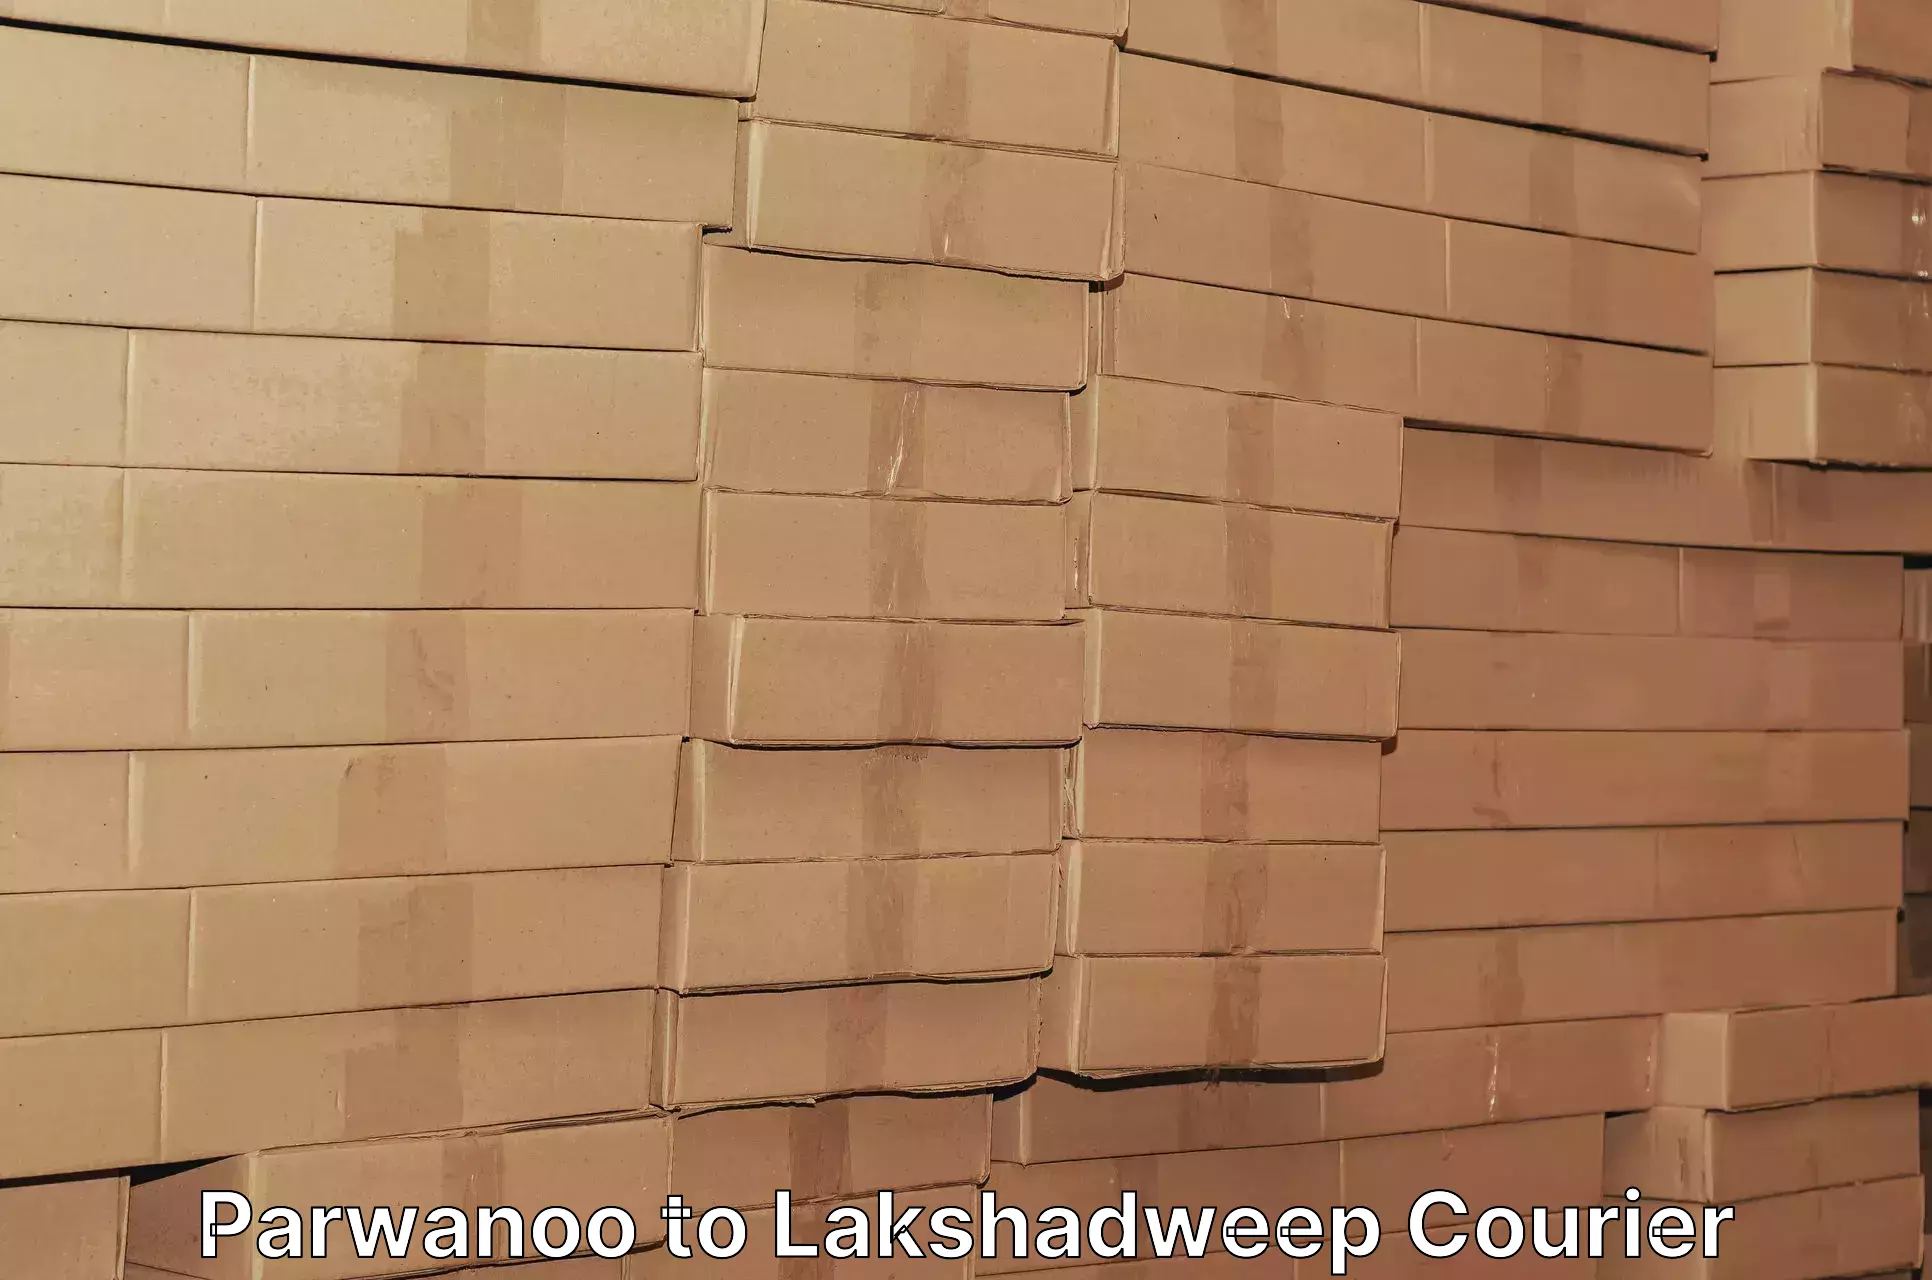 User-friendly courier app Parwanoo to Lakshadweep